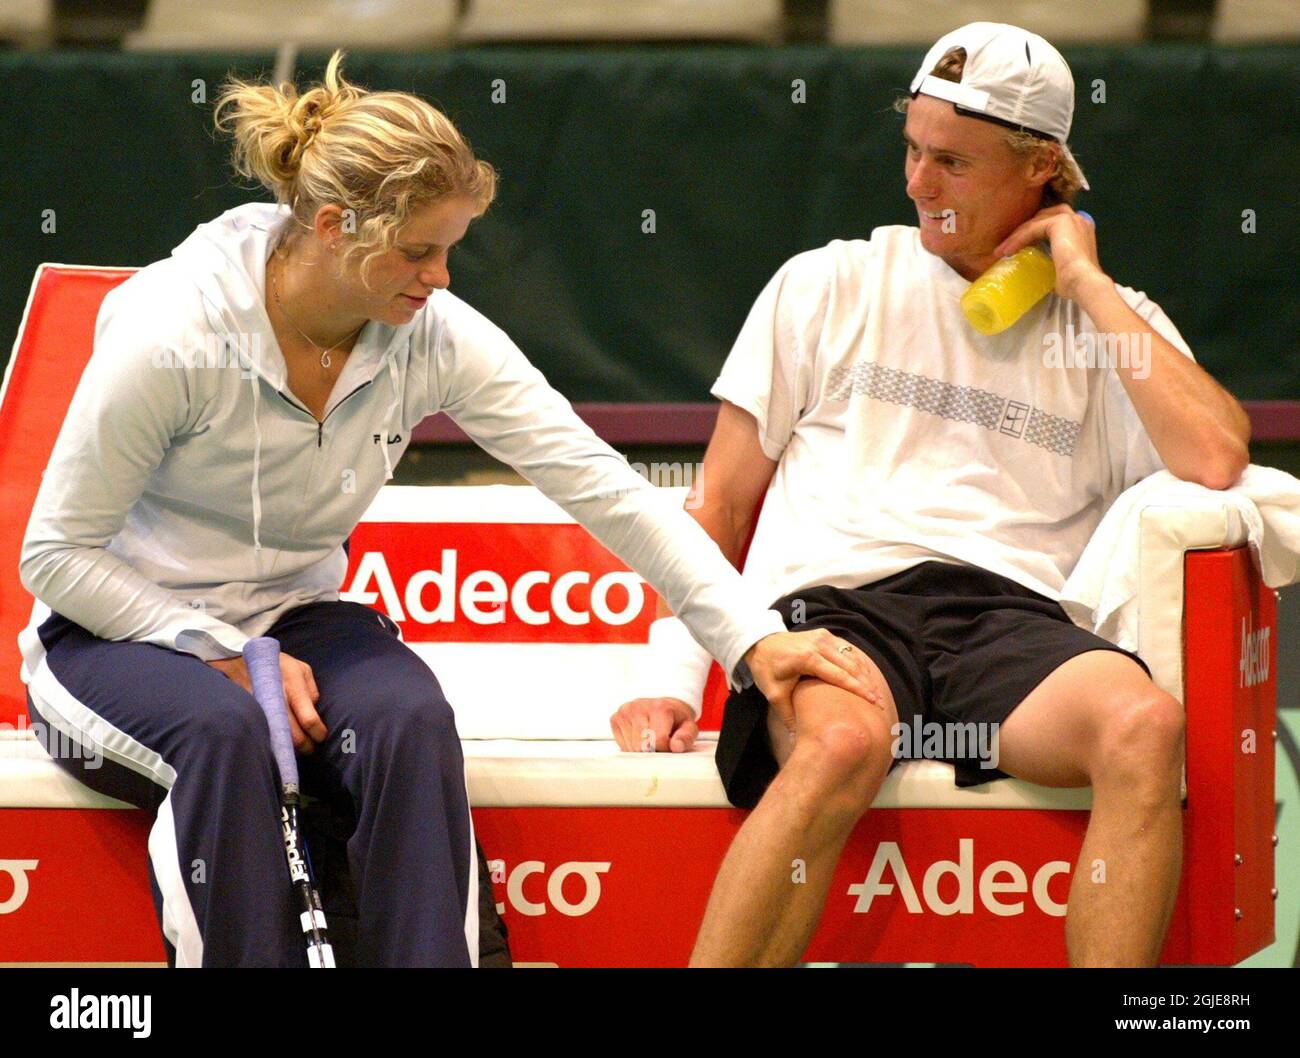 Australia's Lleyton Hewitt (r) gets a massage from his girlfriend, Belgian tennis player Kim Clijsters (r),  during the training session Stock Photo